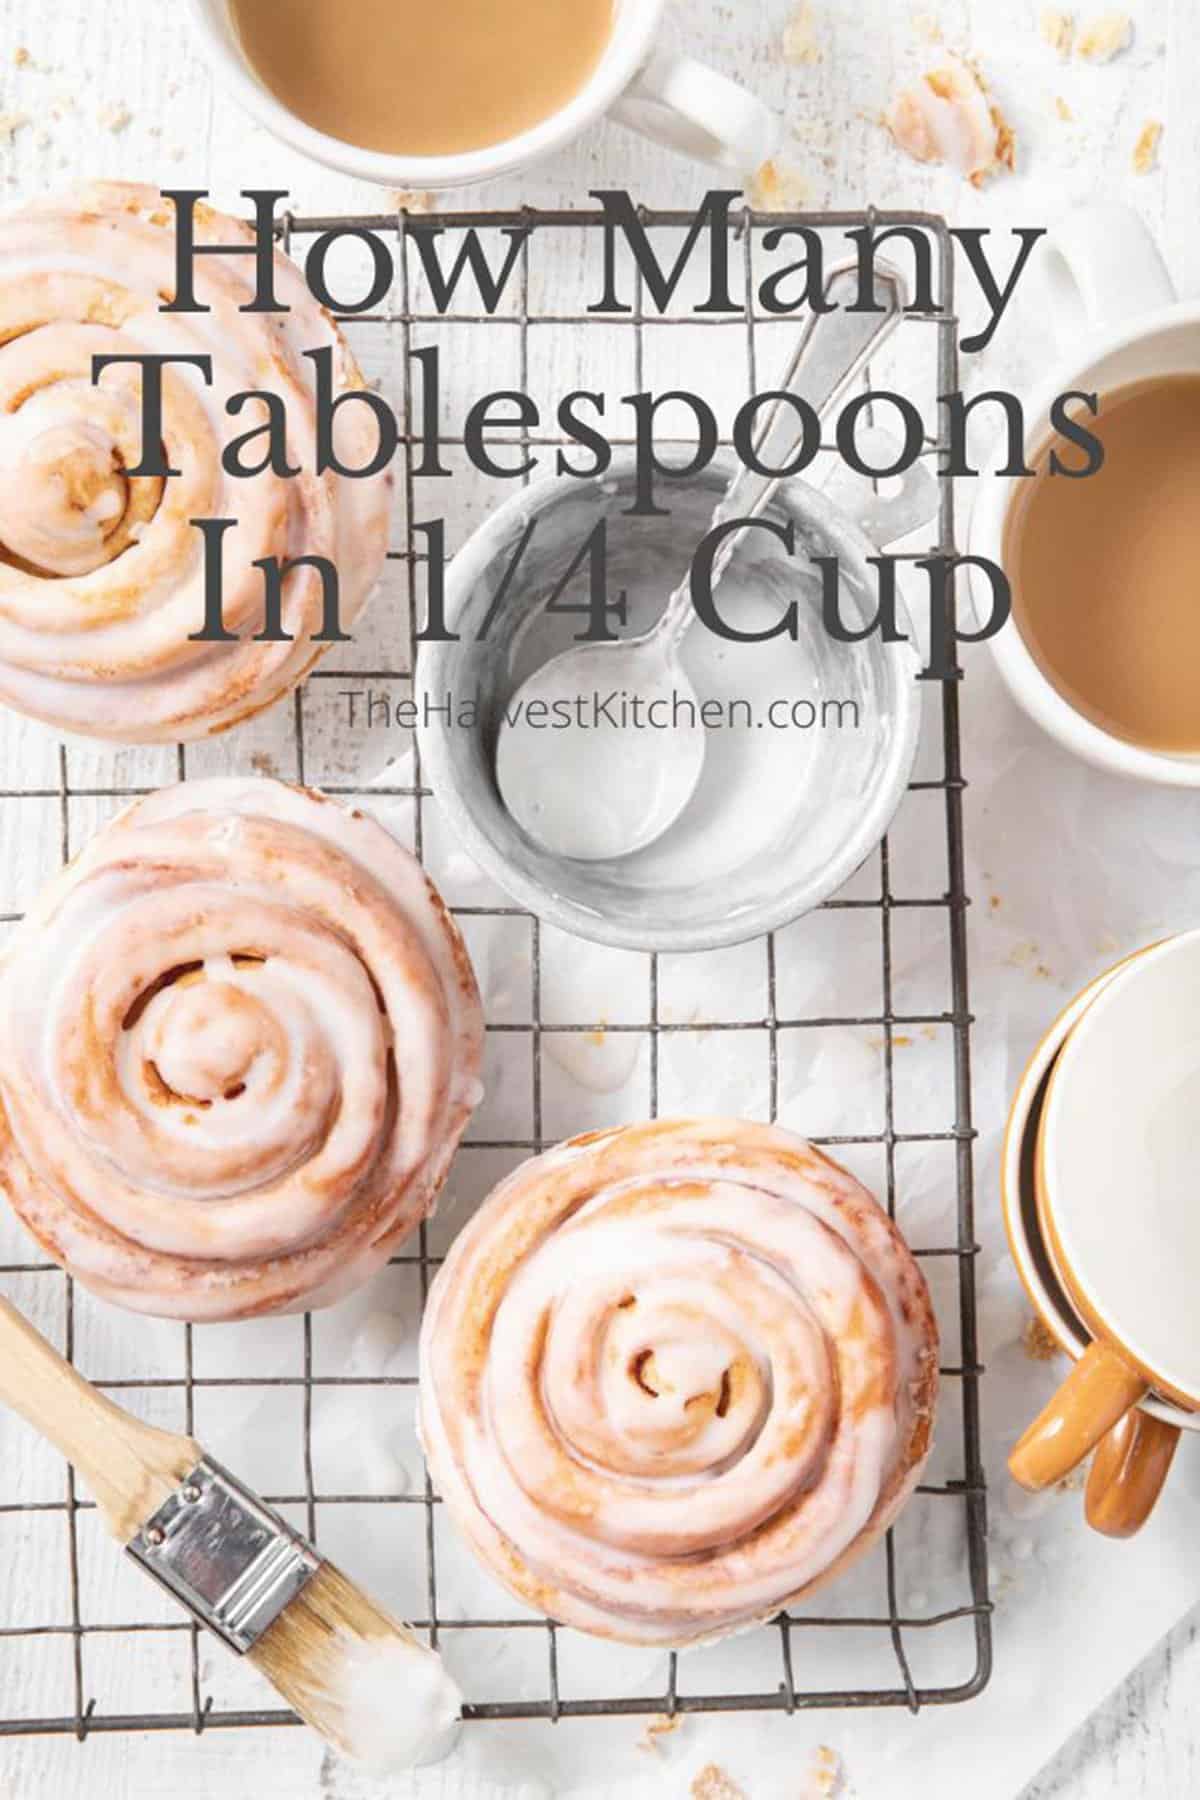 https://www.theharvestkitchen.com/wp-content/uploads/2023/04/1-4-cup-in-tablespoons.jpg